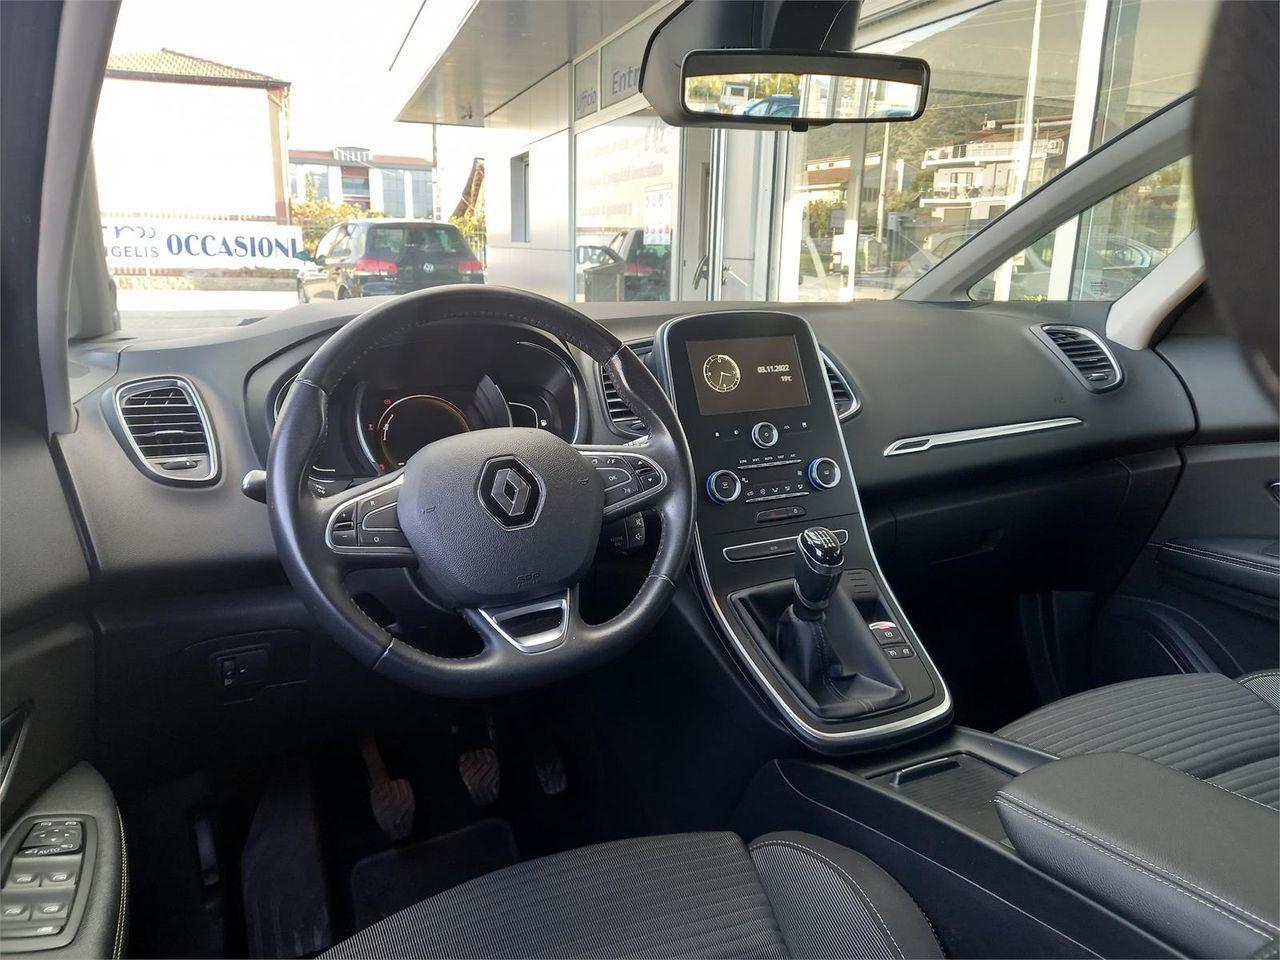 Renault Scenic 1.7 BLUE dCi *** SPORT EDITION *** 120 CV MANUALE